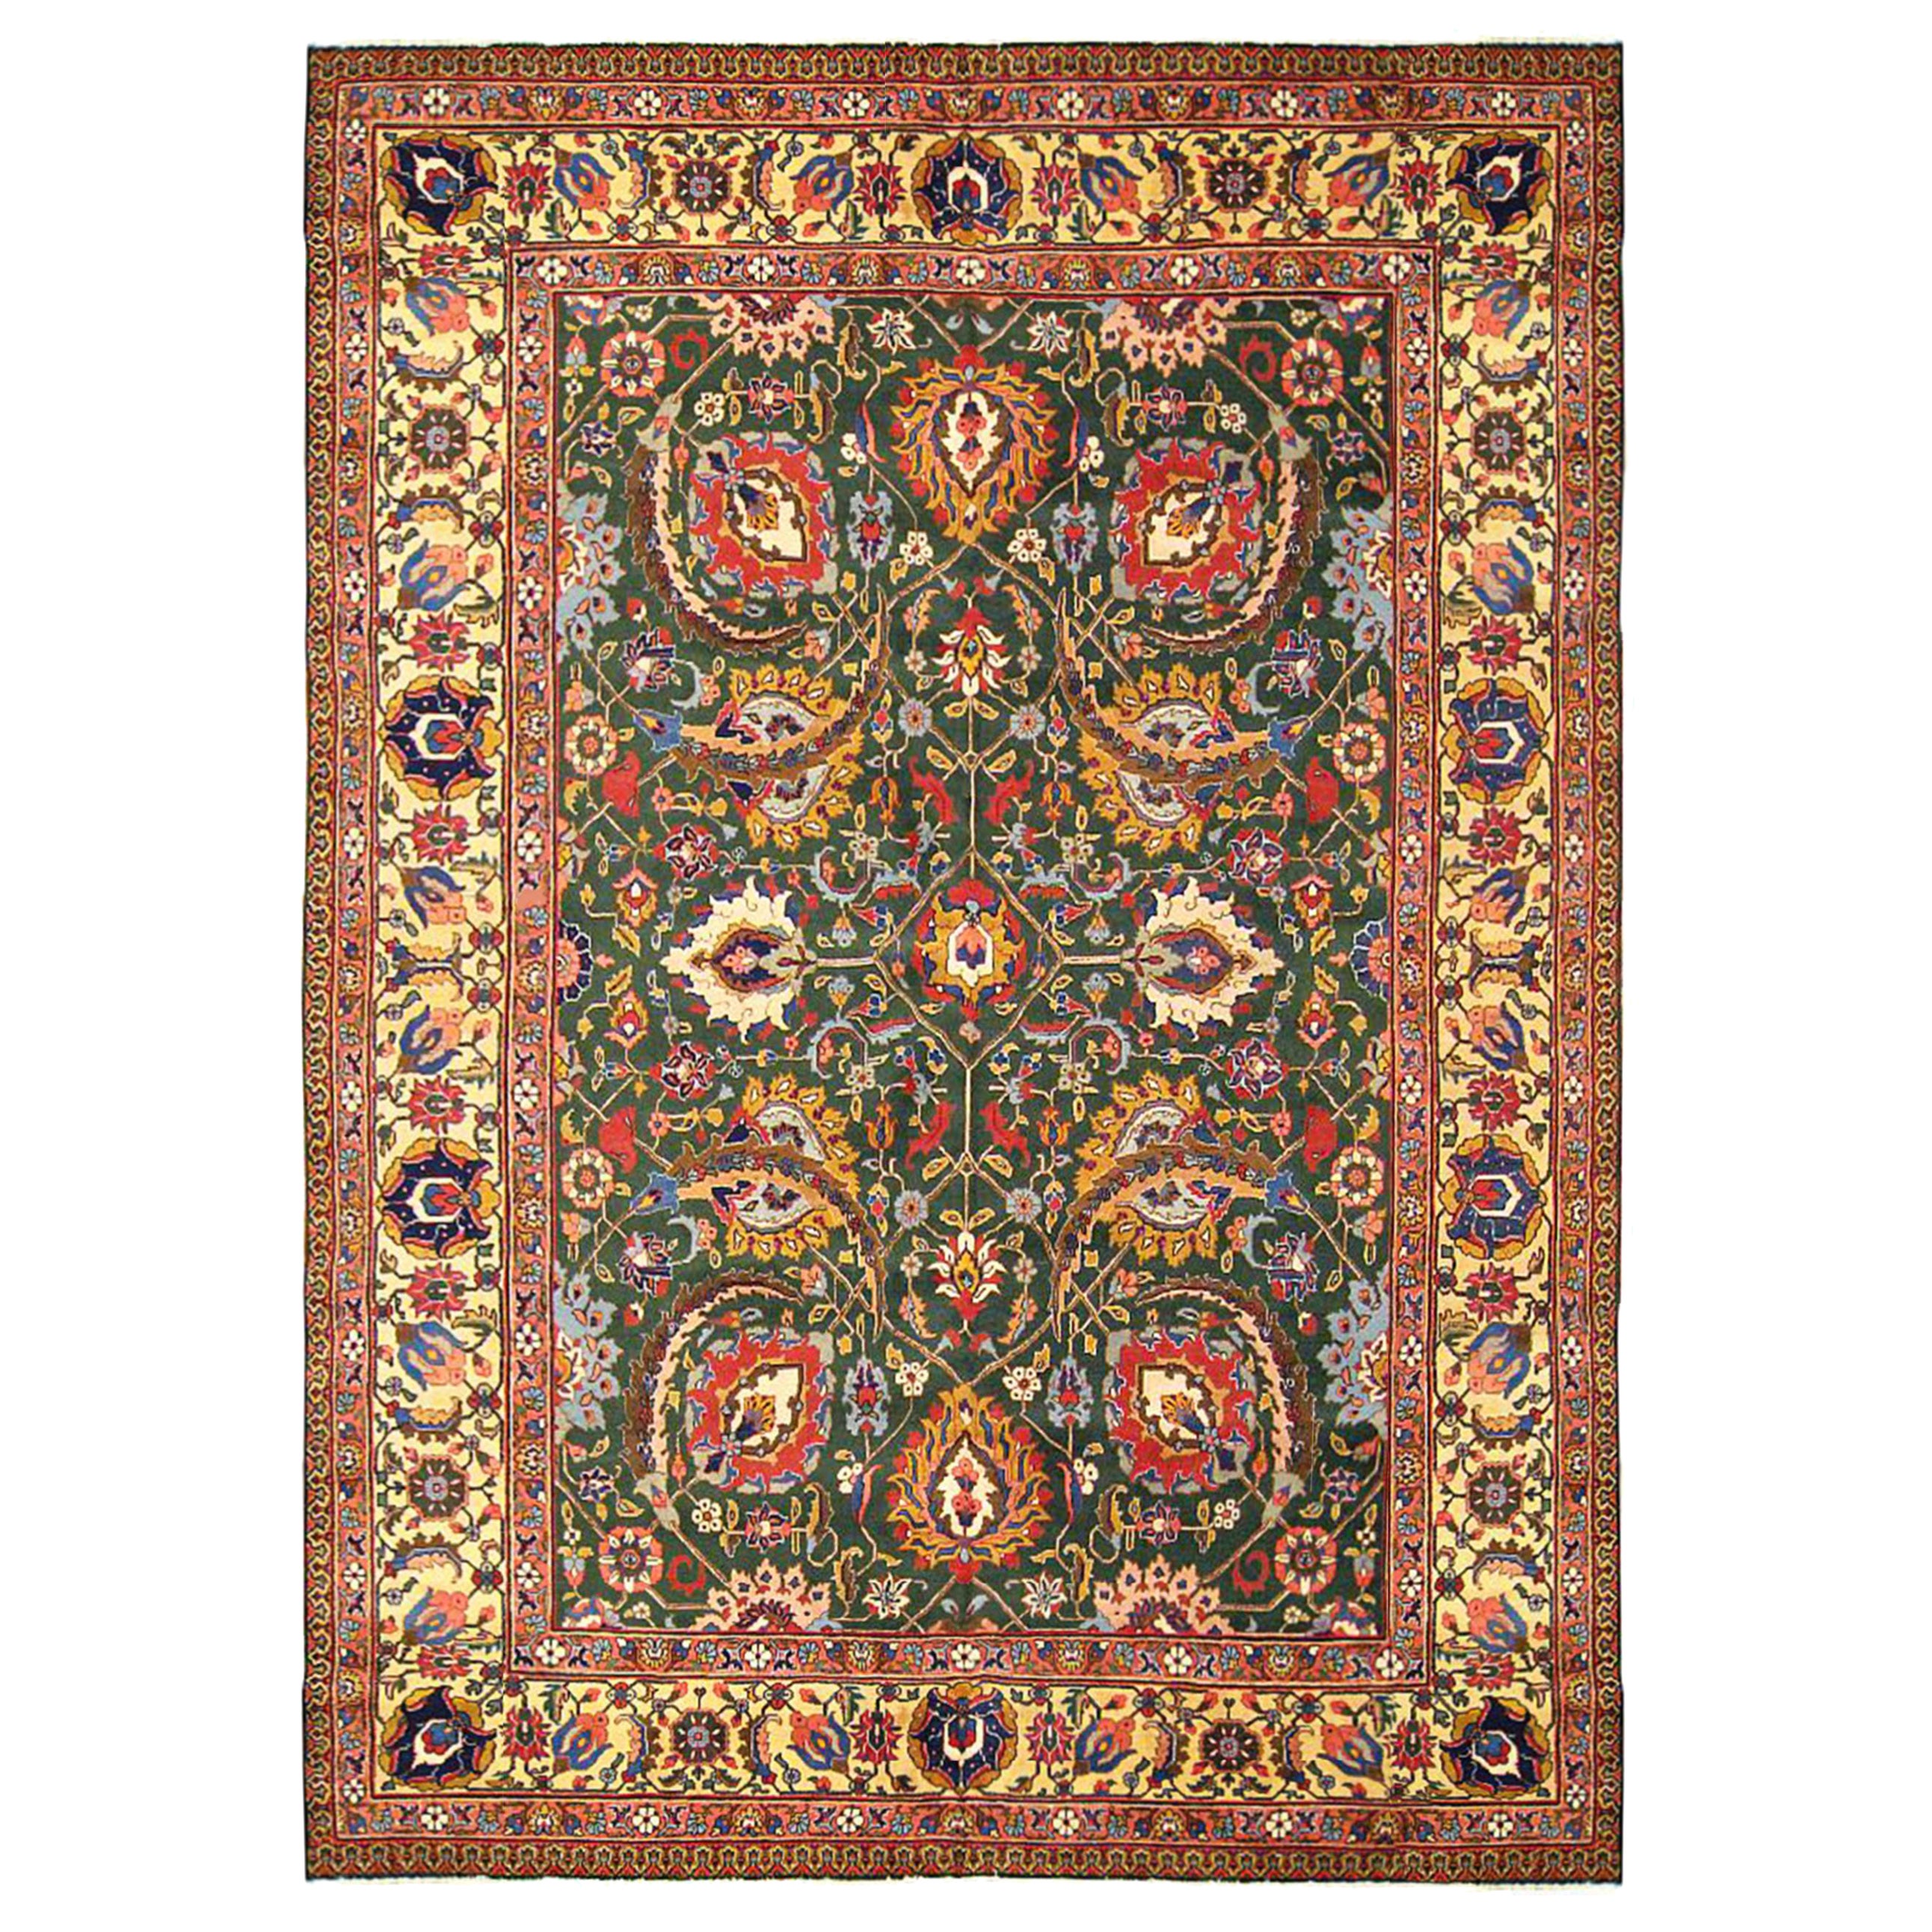 Antique Persian Tabriz Oriental Carpet in Room Size with Palmettes For Sale